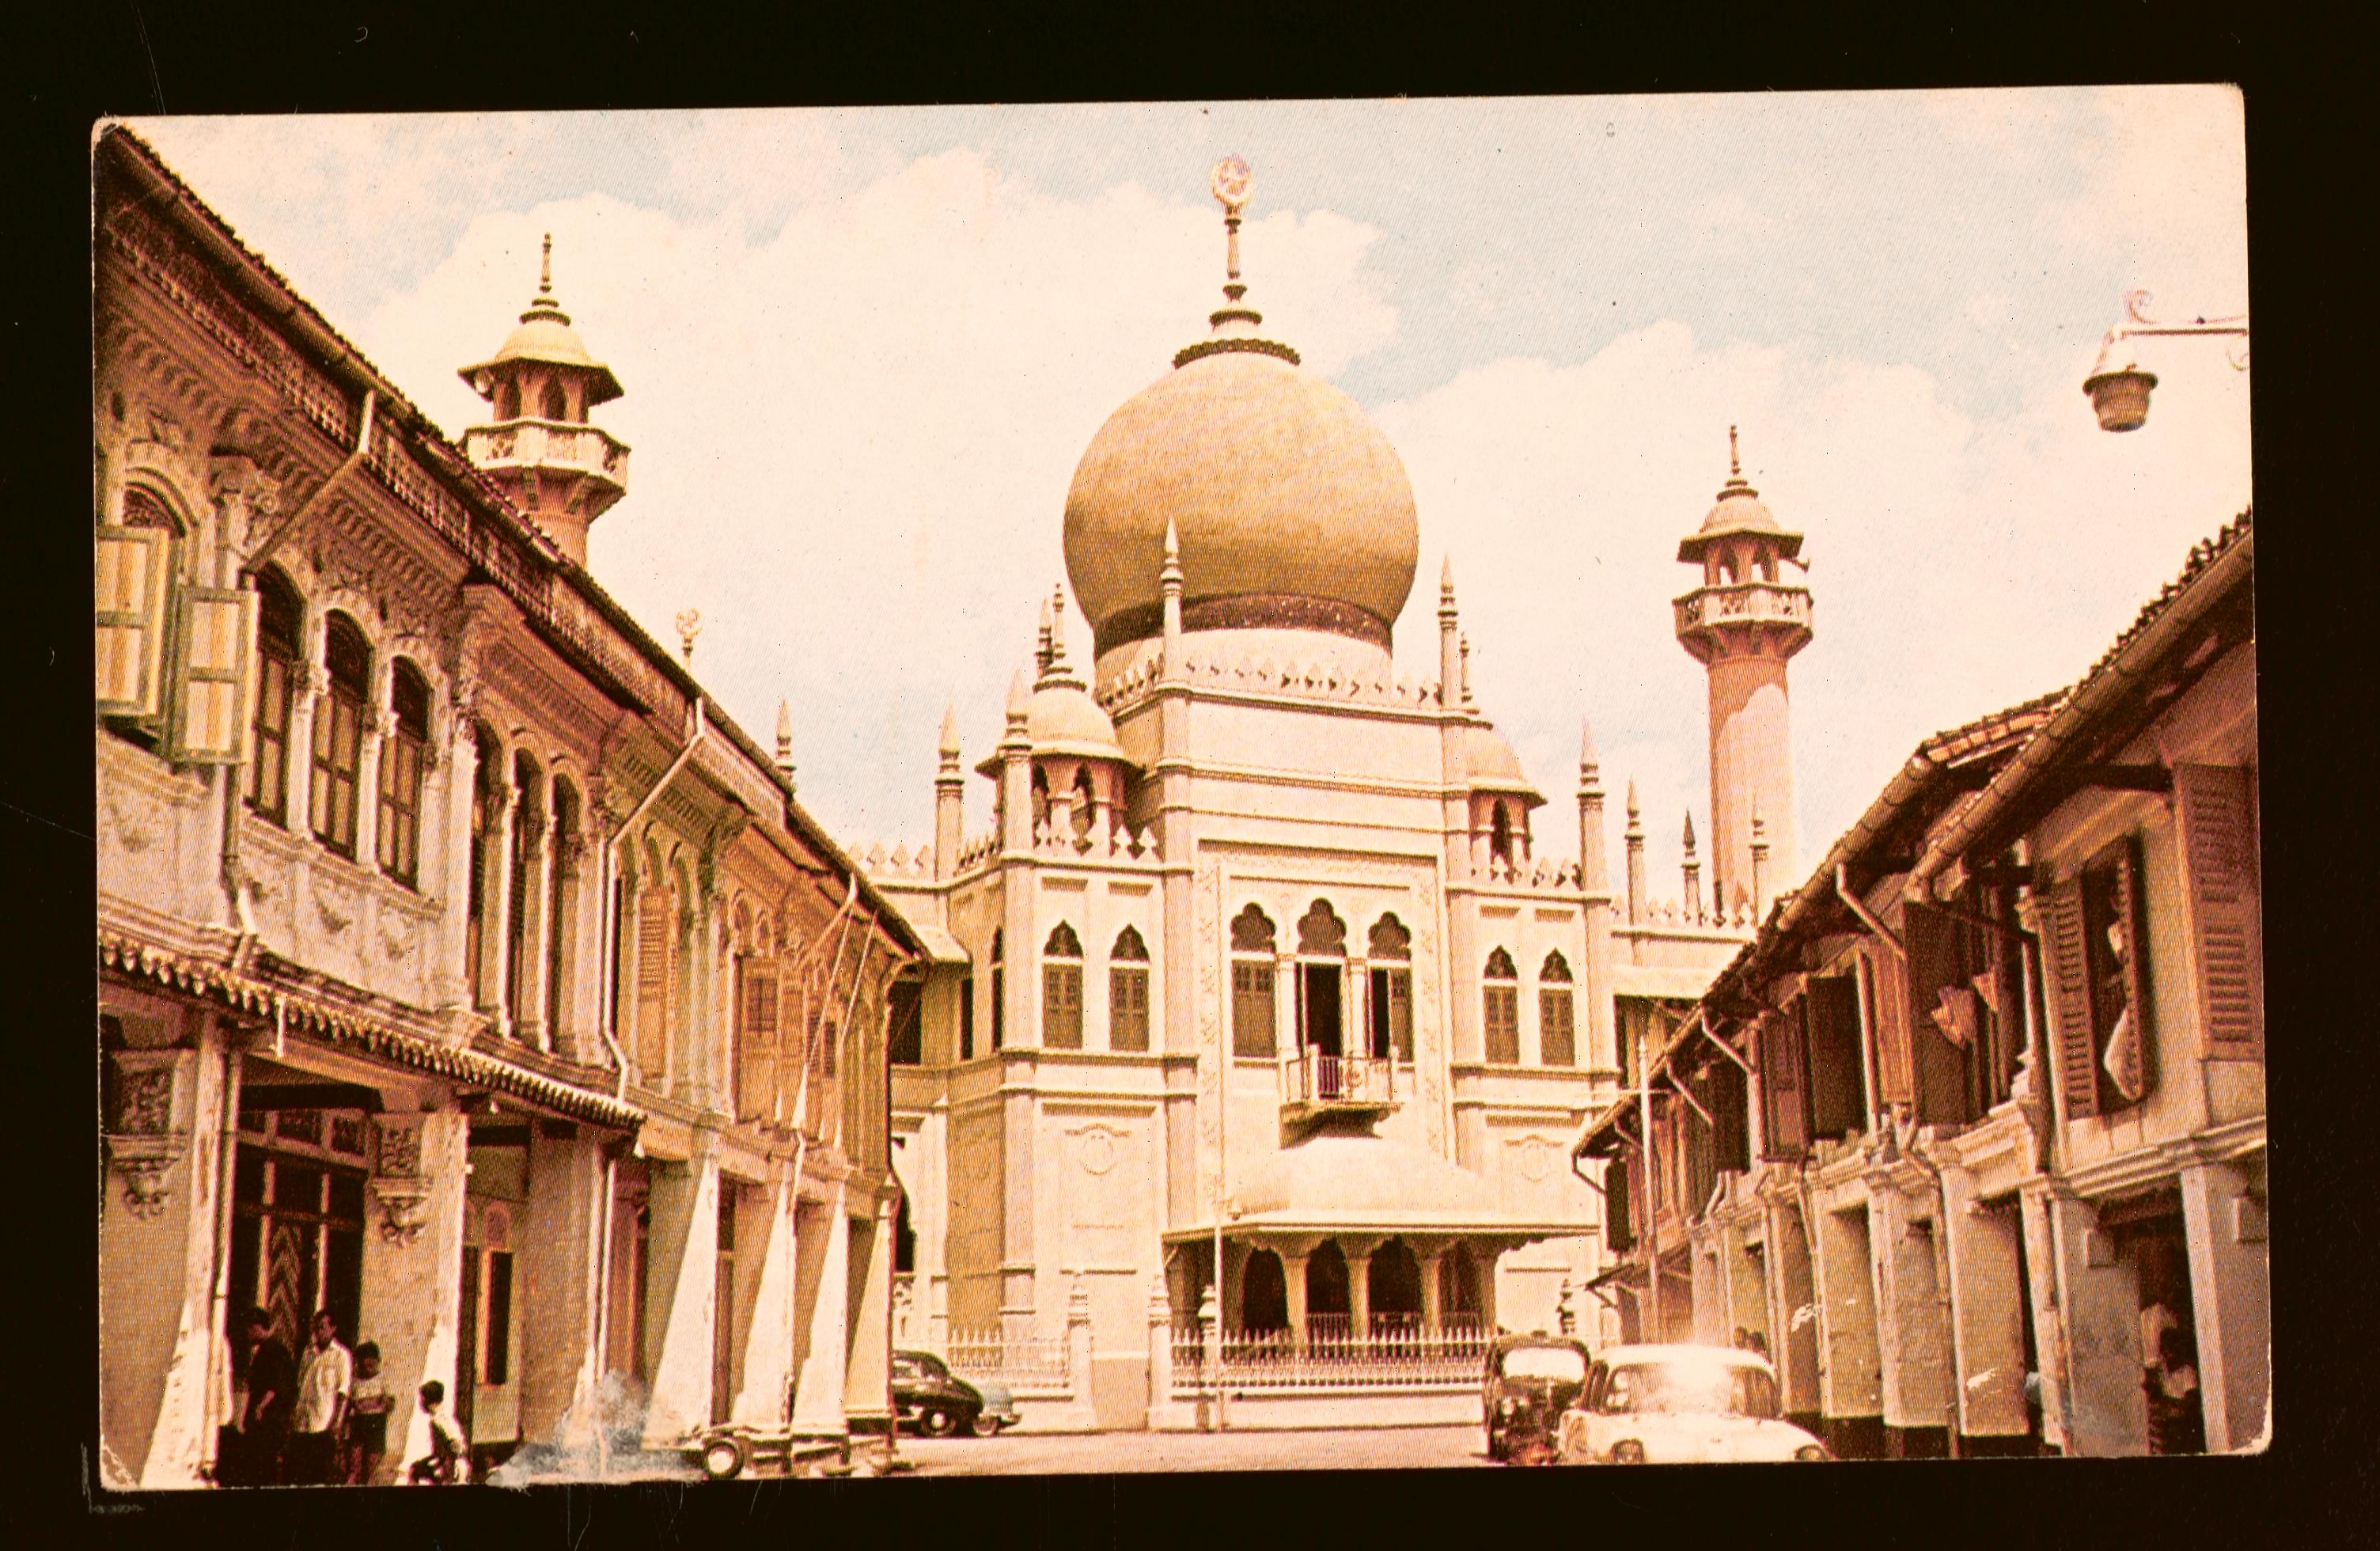 Tour-Mosques-and-Muslim-Heritage-of-Singapore-in-the-Context-of-the-Cosmopolitan-Malay-World-Past-and-Present---by-Dr-Imran-bin-Tajudeen